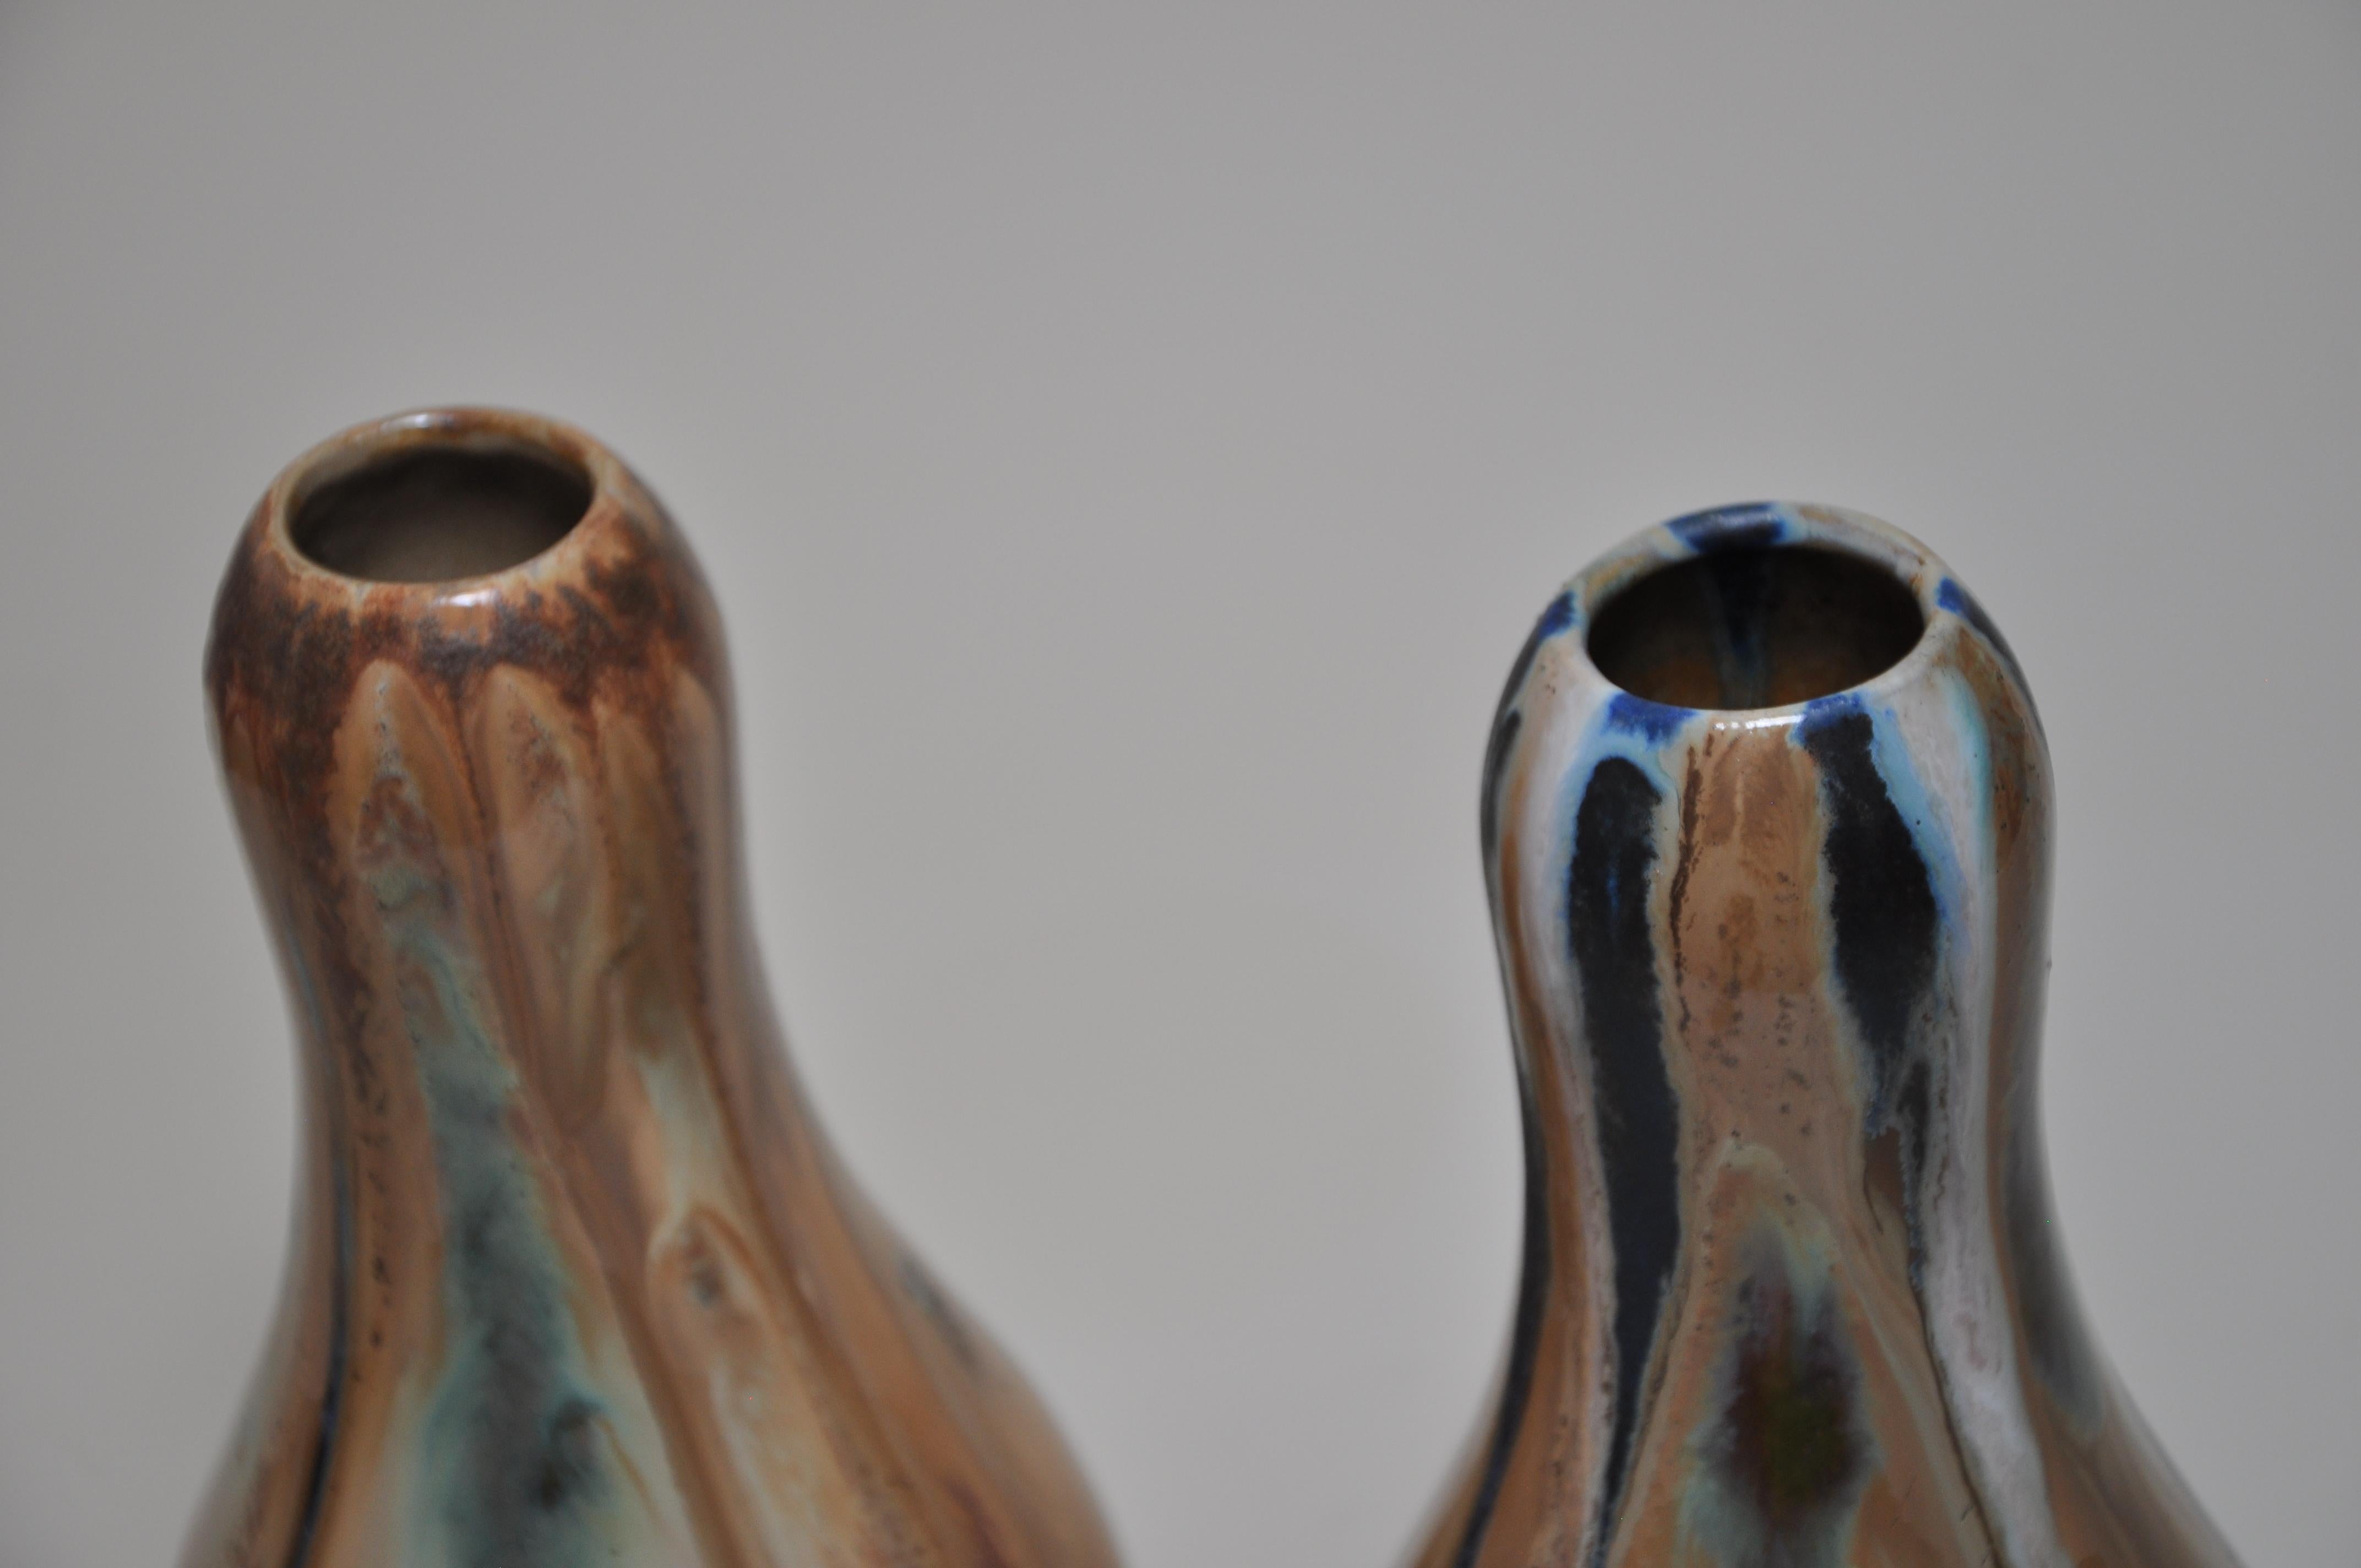 Pair of French Art Nouveau vases by Alfonse Cytere of Rambervillers green ochre navy blue 

Two very attractive ceramic vases by Alfonse Cytere made at his Rambervillers works, in the form of gourds, of Japanese inspiration with complimentary